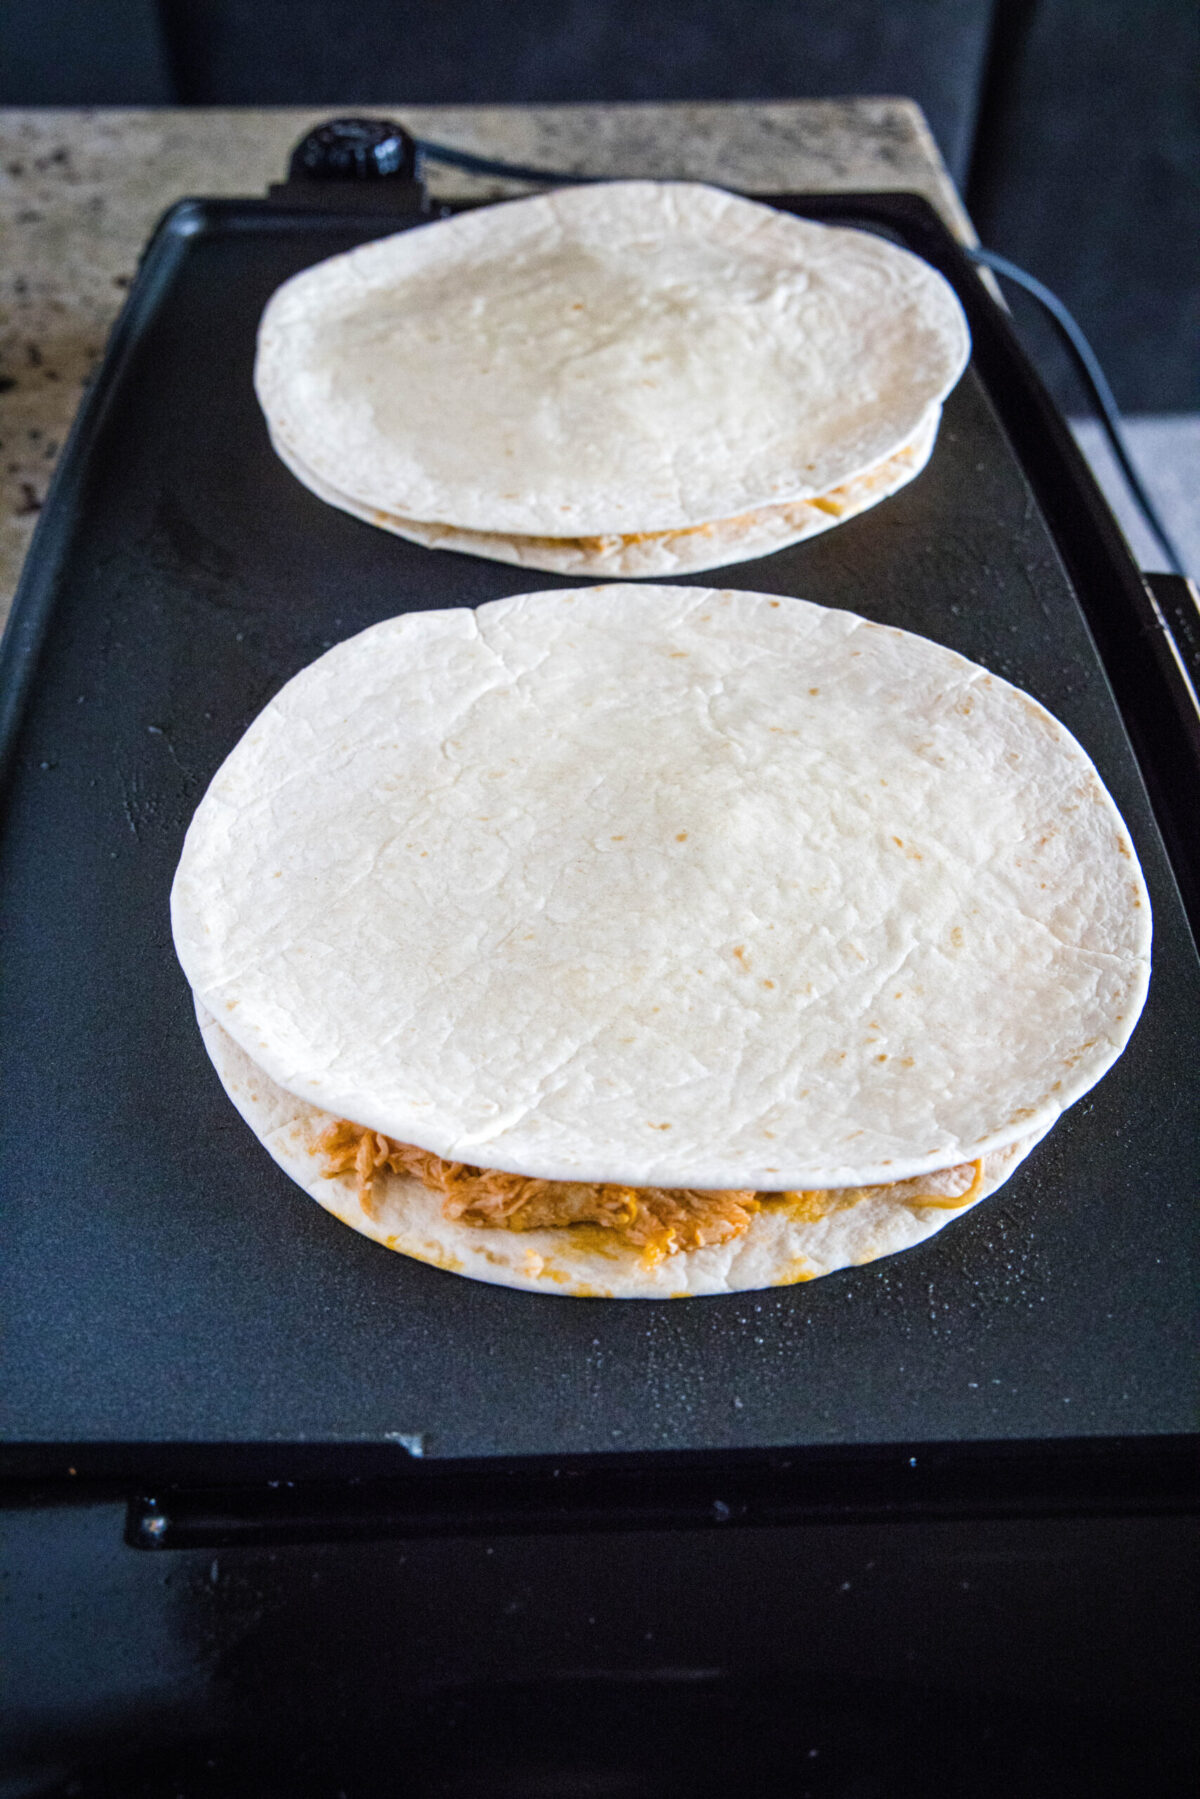 Two uncooked quesadillas on a skillet